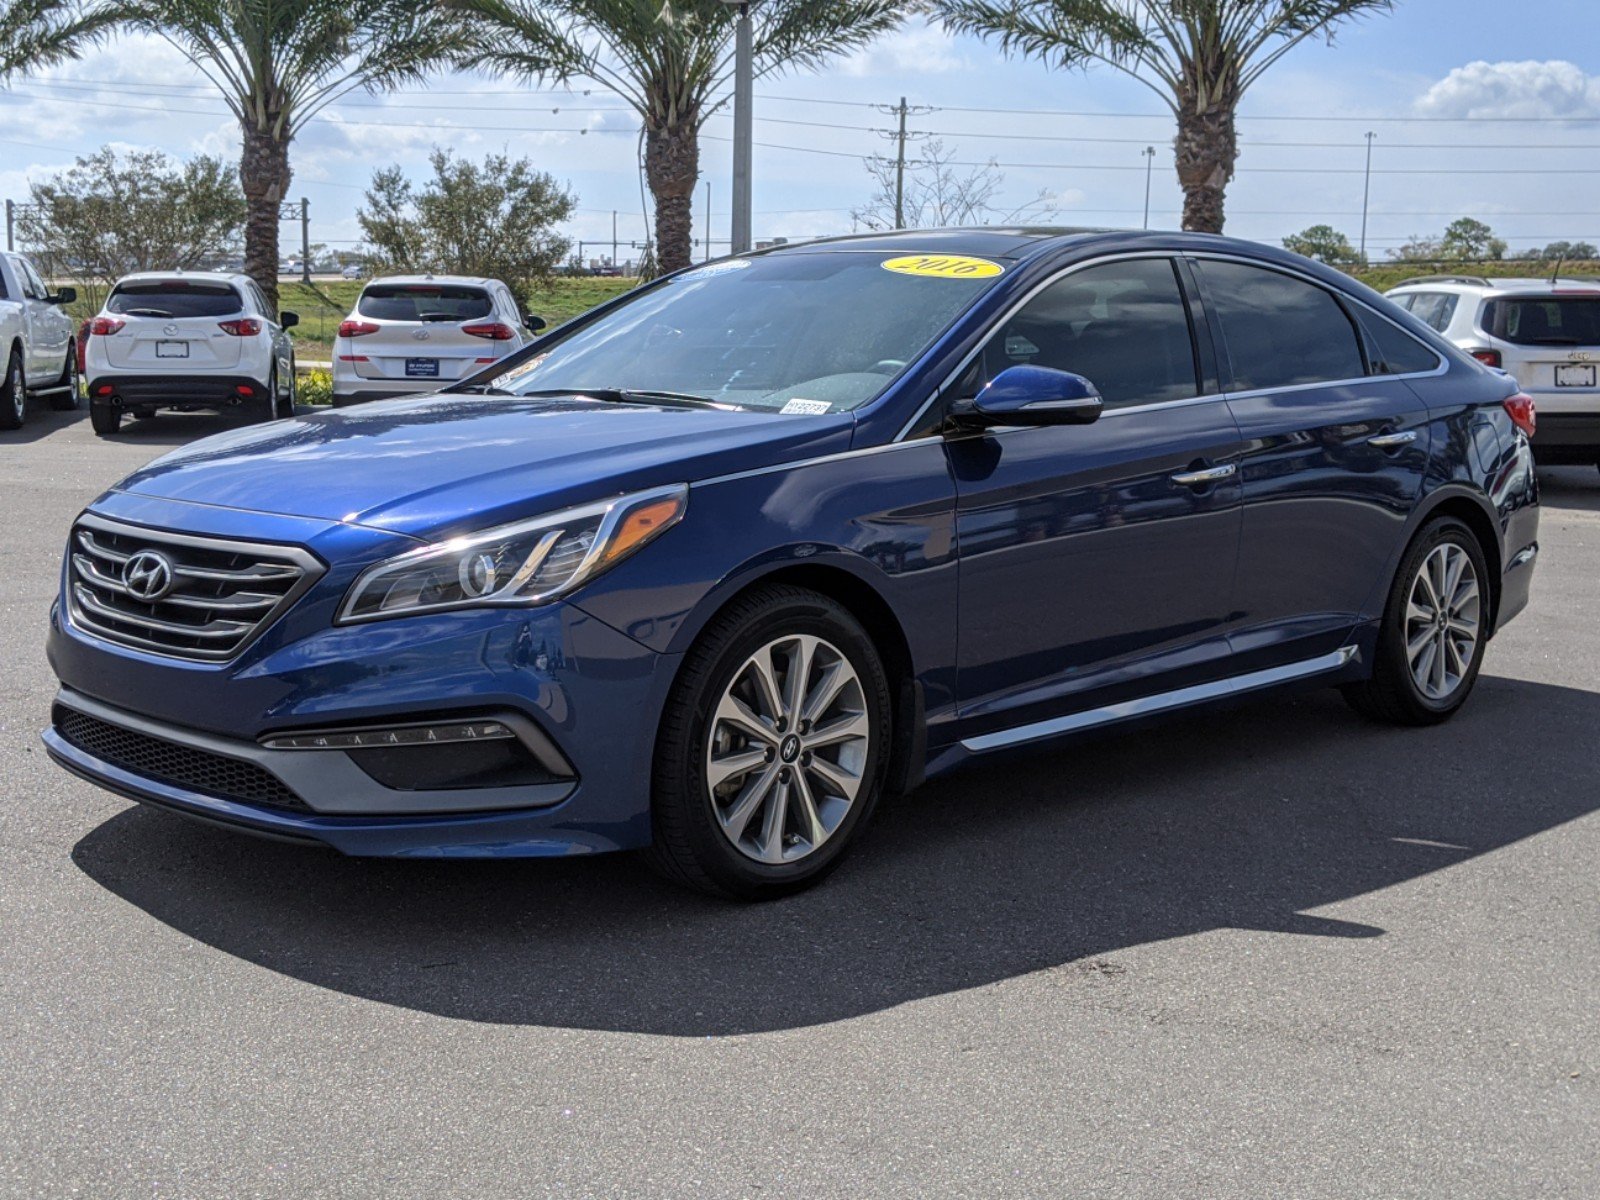 Certified Pre-Owned 2016 Hyundai Sonata 2.4L Limited 4dr Car in Sanford ...